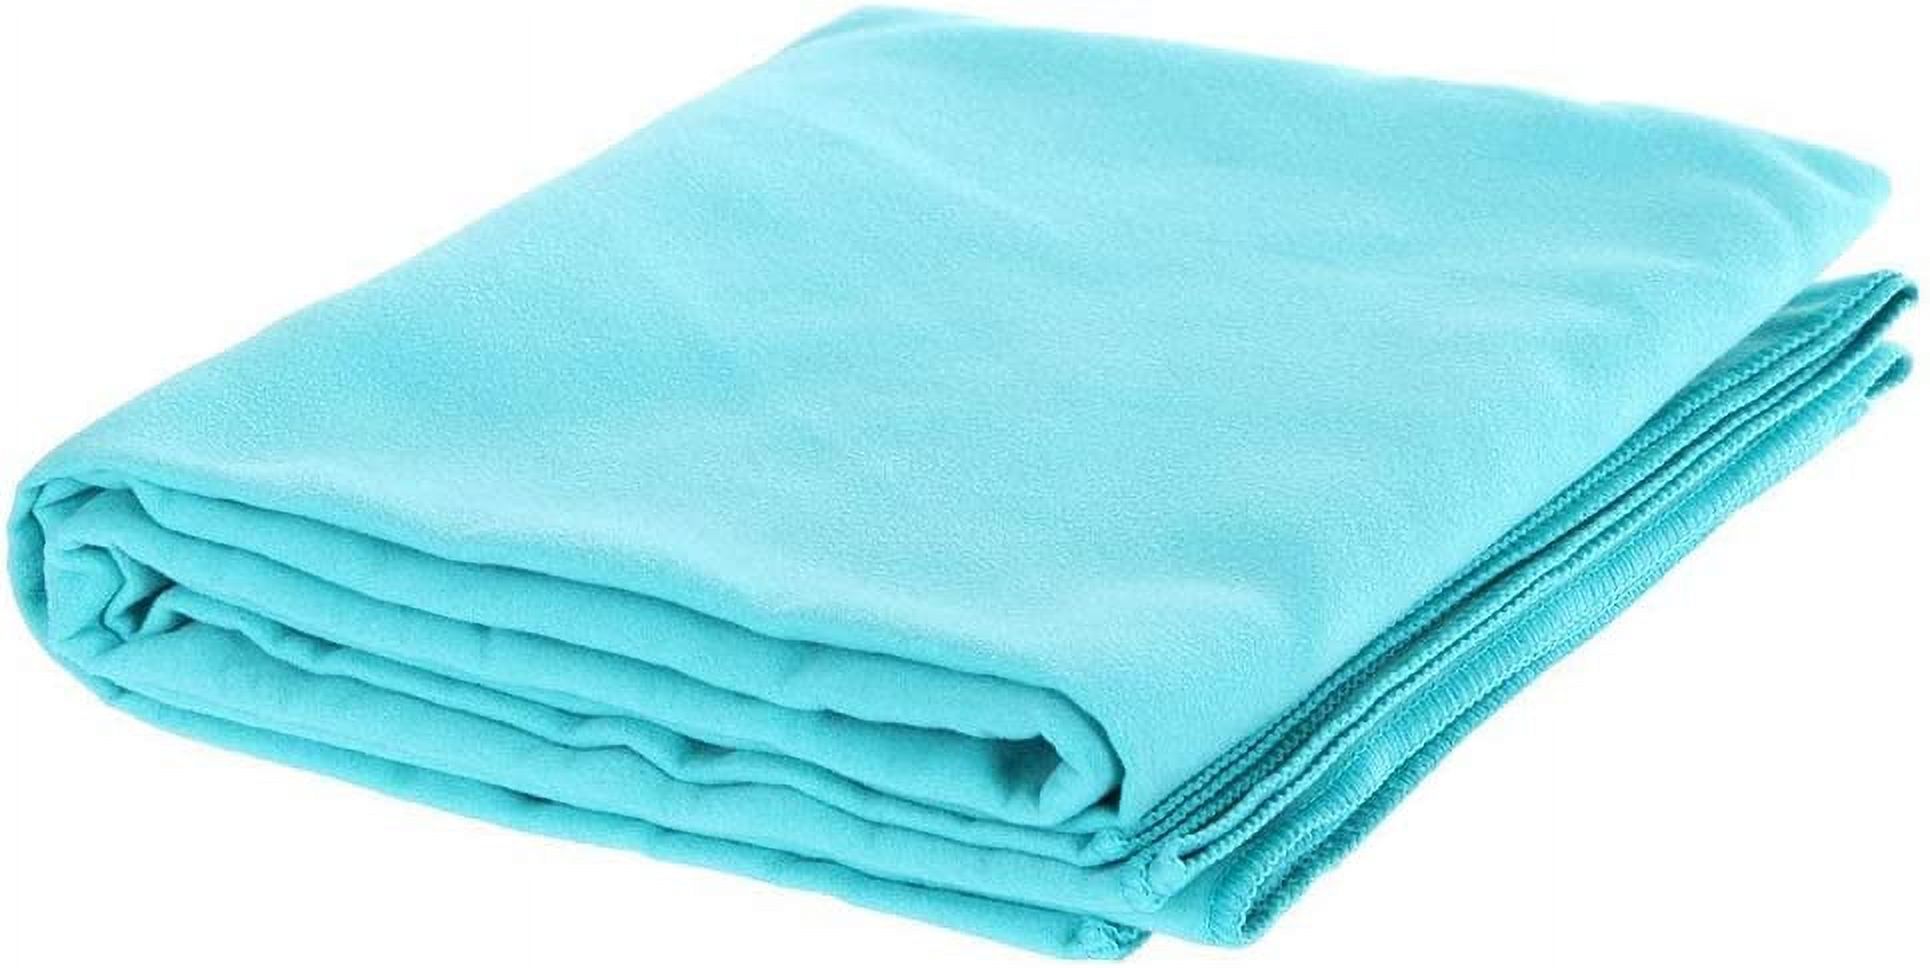 MINISO Cooling Towel, Microfiber Towel, Fast Drying Towel, Running Towel and Workout Towel for Sports, Workout, Fitness, Gym, Yoga, Running, Travel, Camping - Green - image 3 of 3